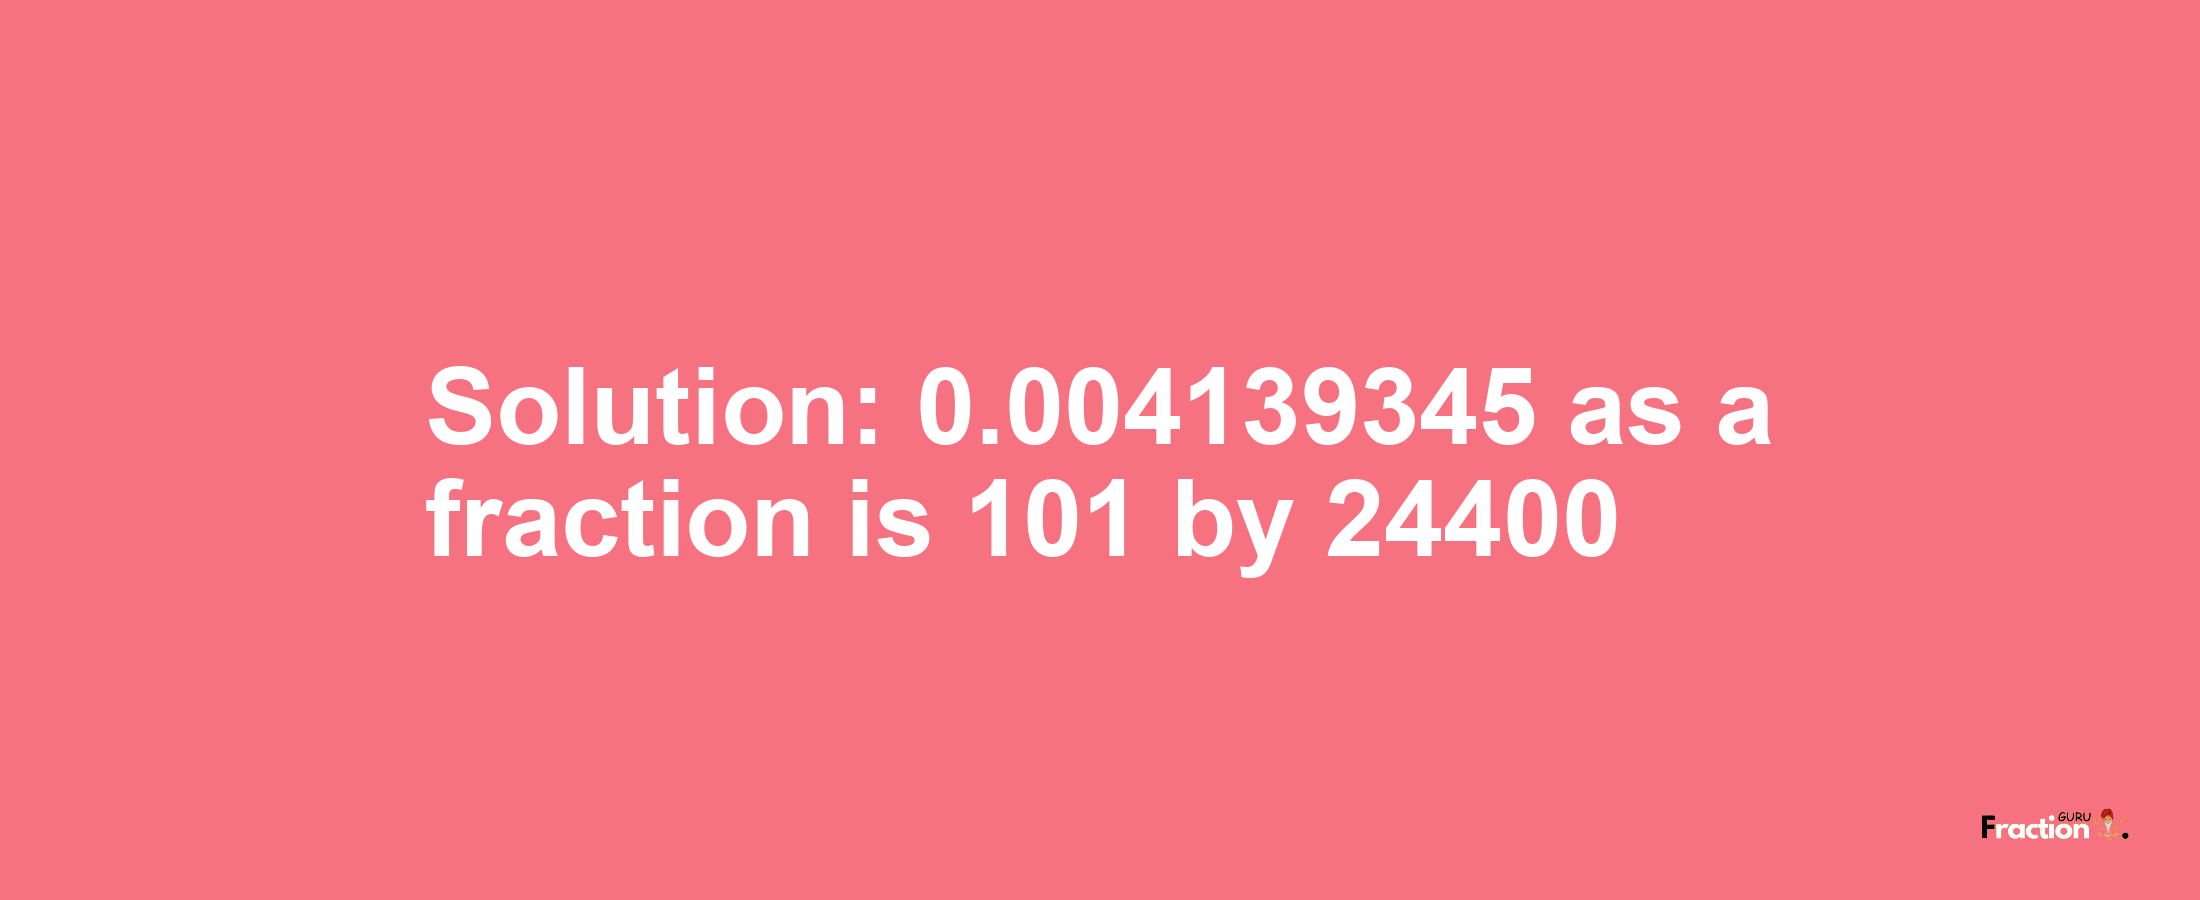 Solution:0.004139345 as a fraction is 101/24400